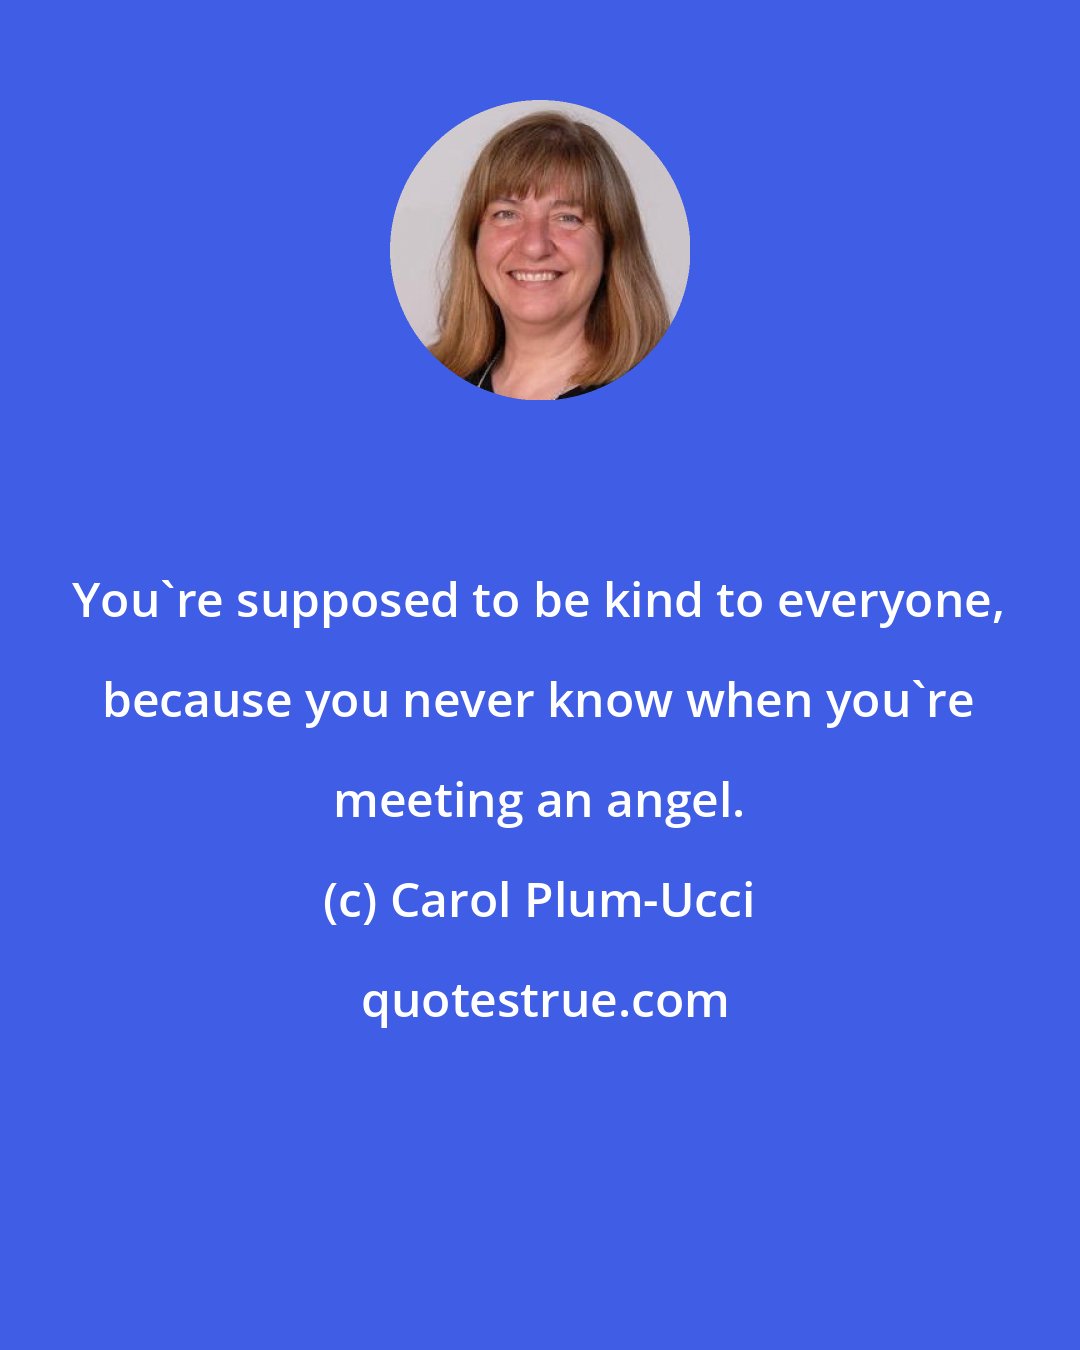 Carol Plum-Ucci: You're supposed to be kind to everyone, because you never know when you're meeting an angel.